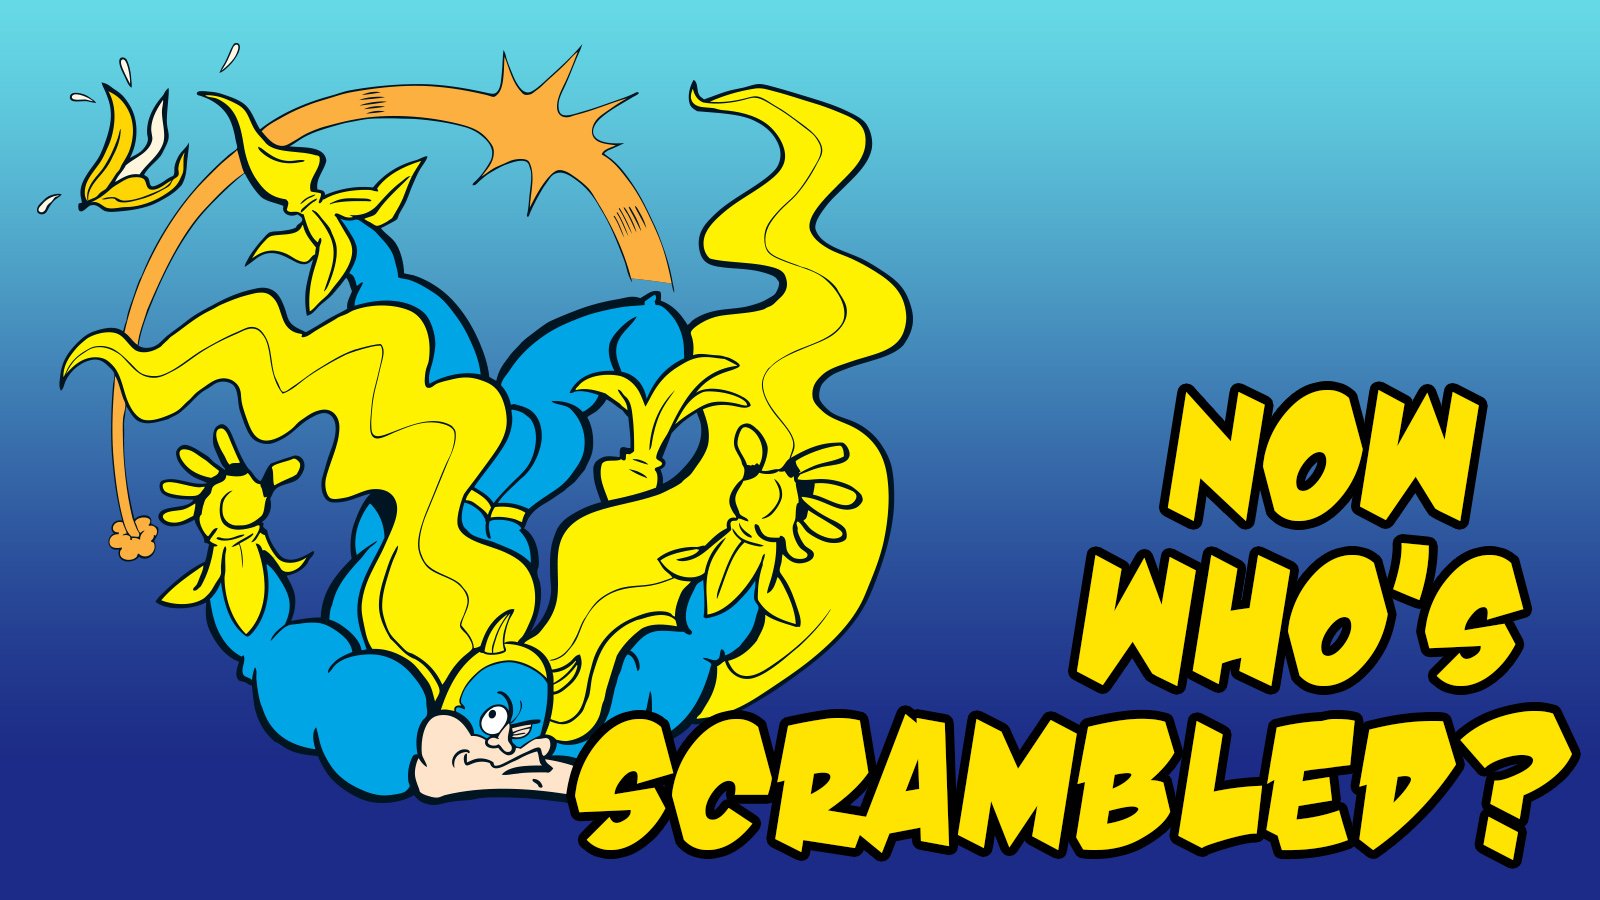 Now which hero is all scrambled? Bananaman's been truly trampled!